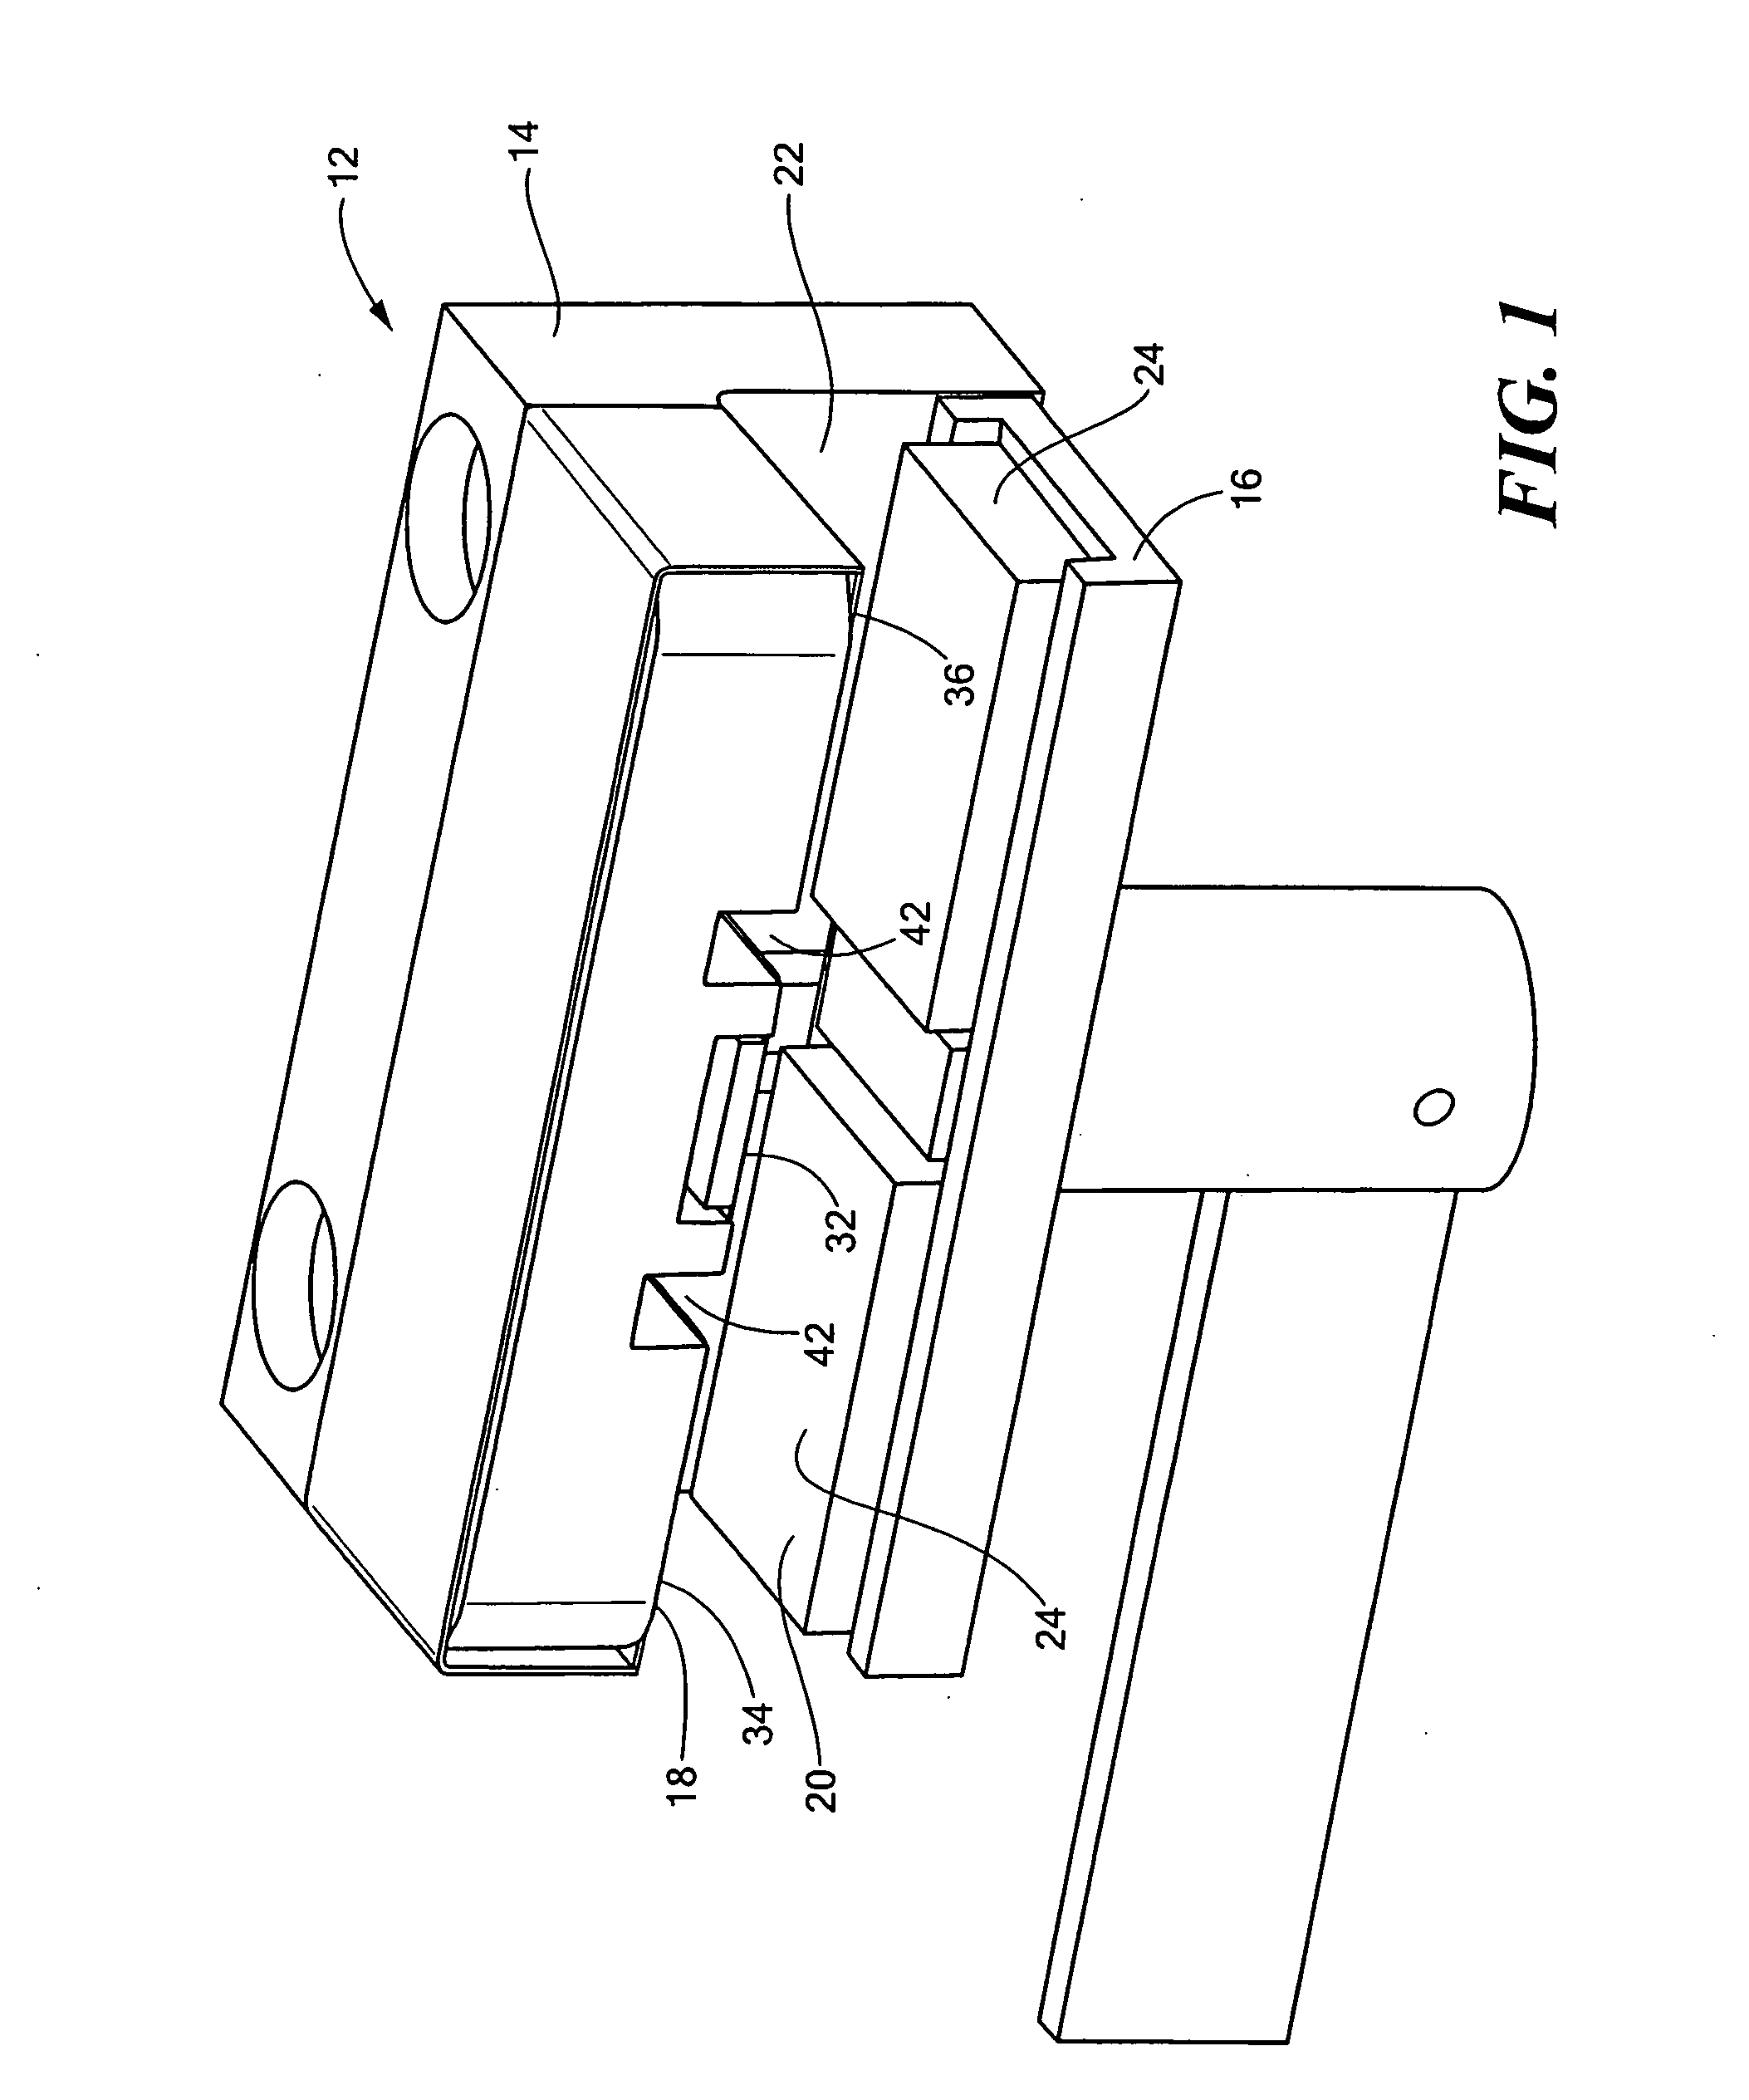 Gas detection in an intravenous fluid delivery system